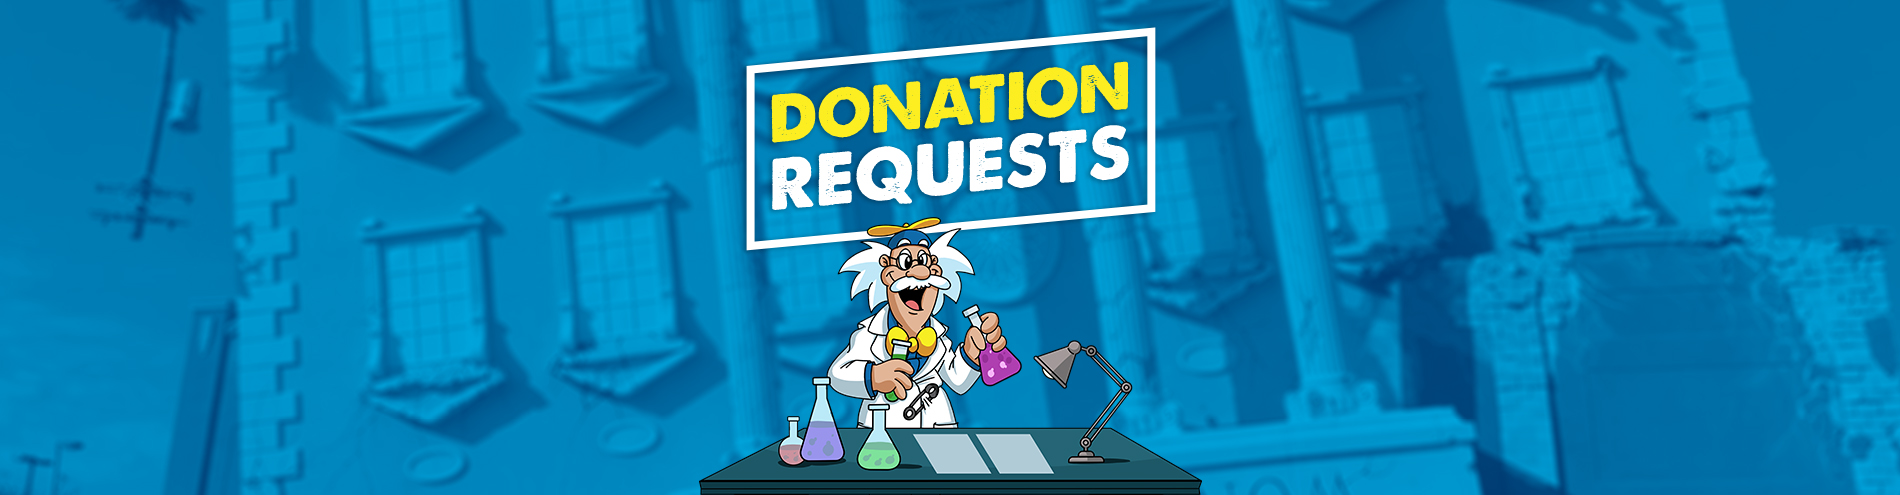 Donation Requests Header